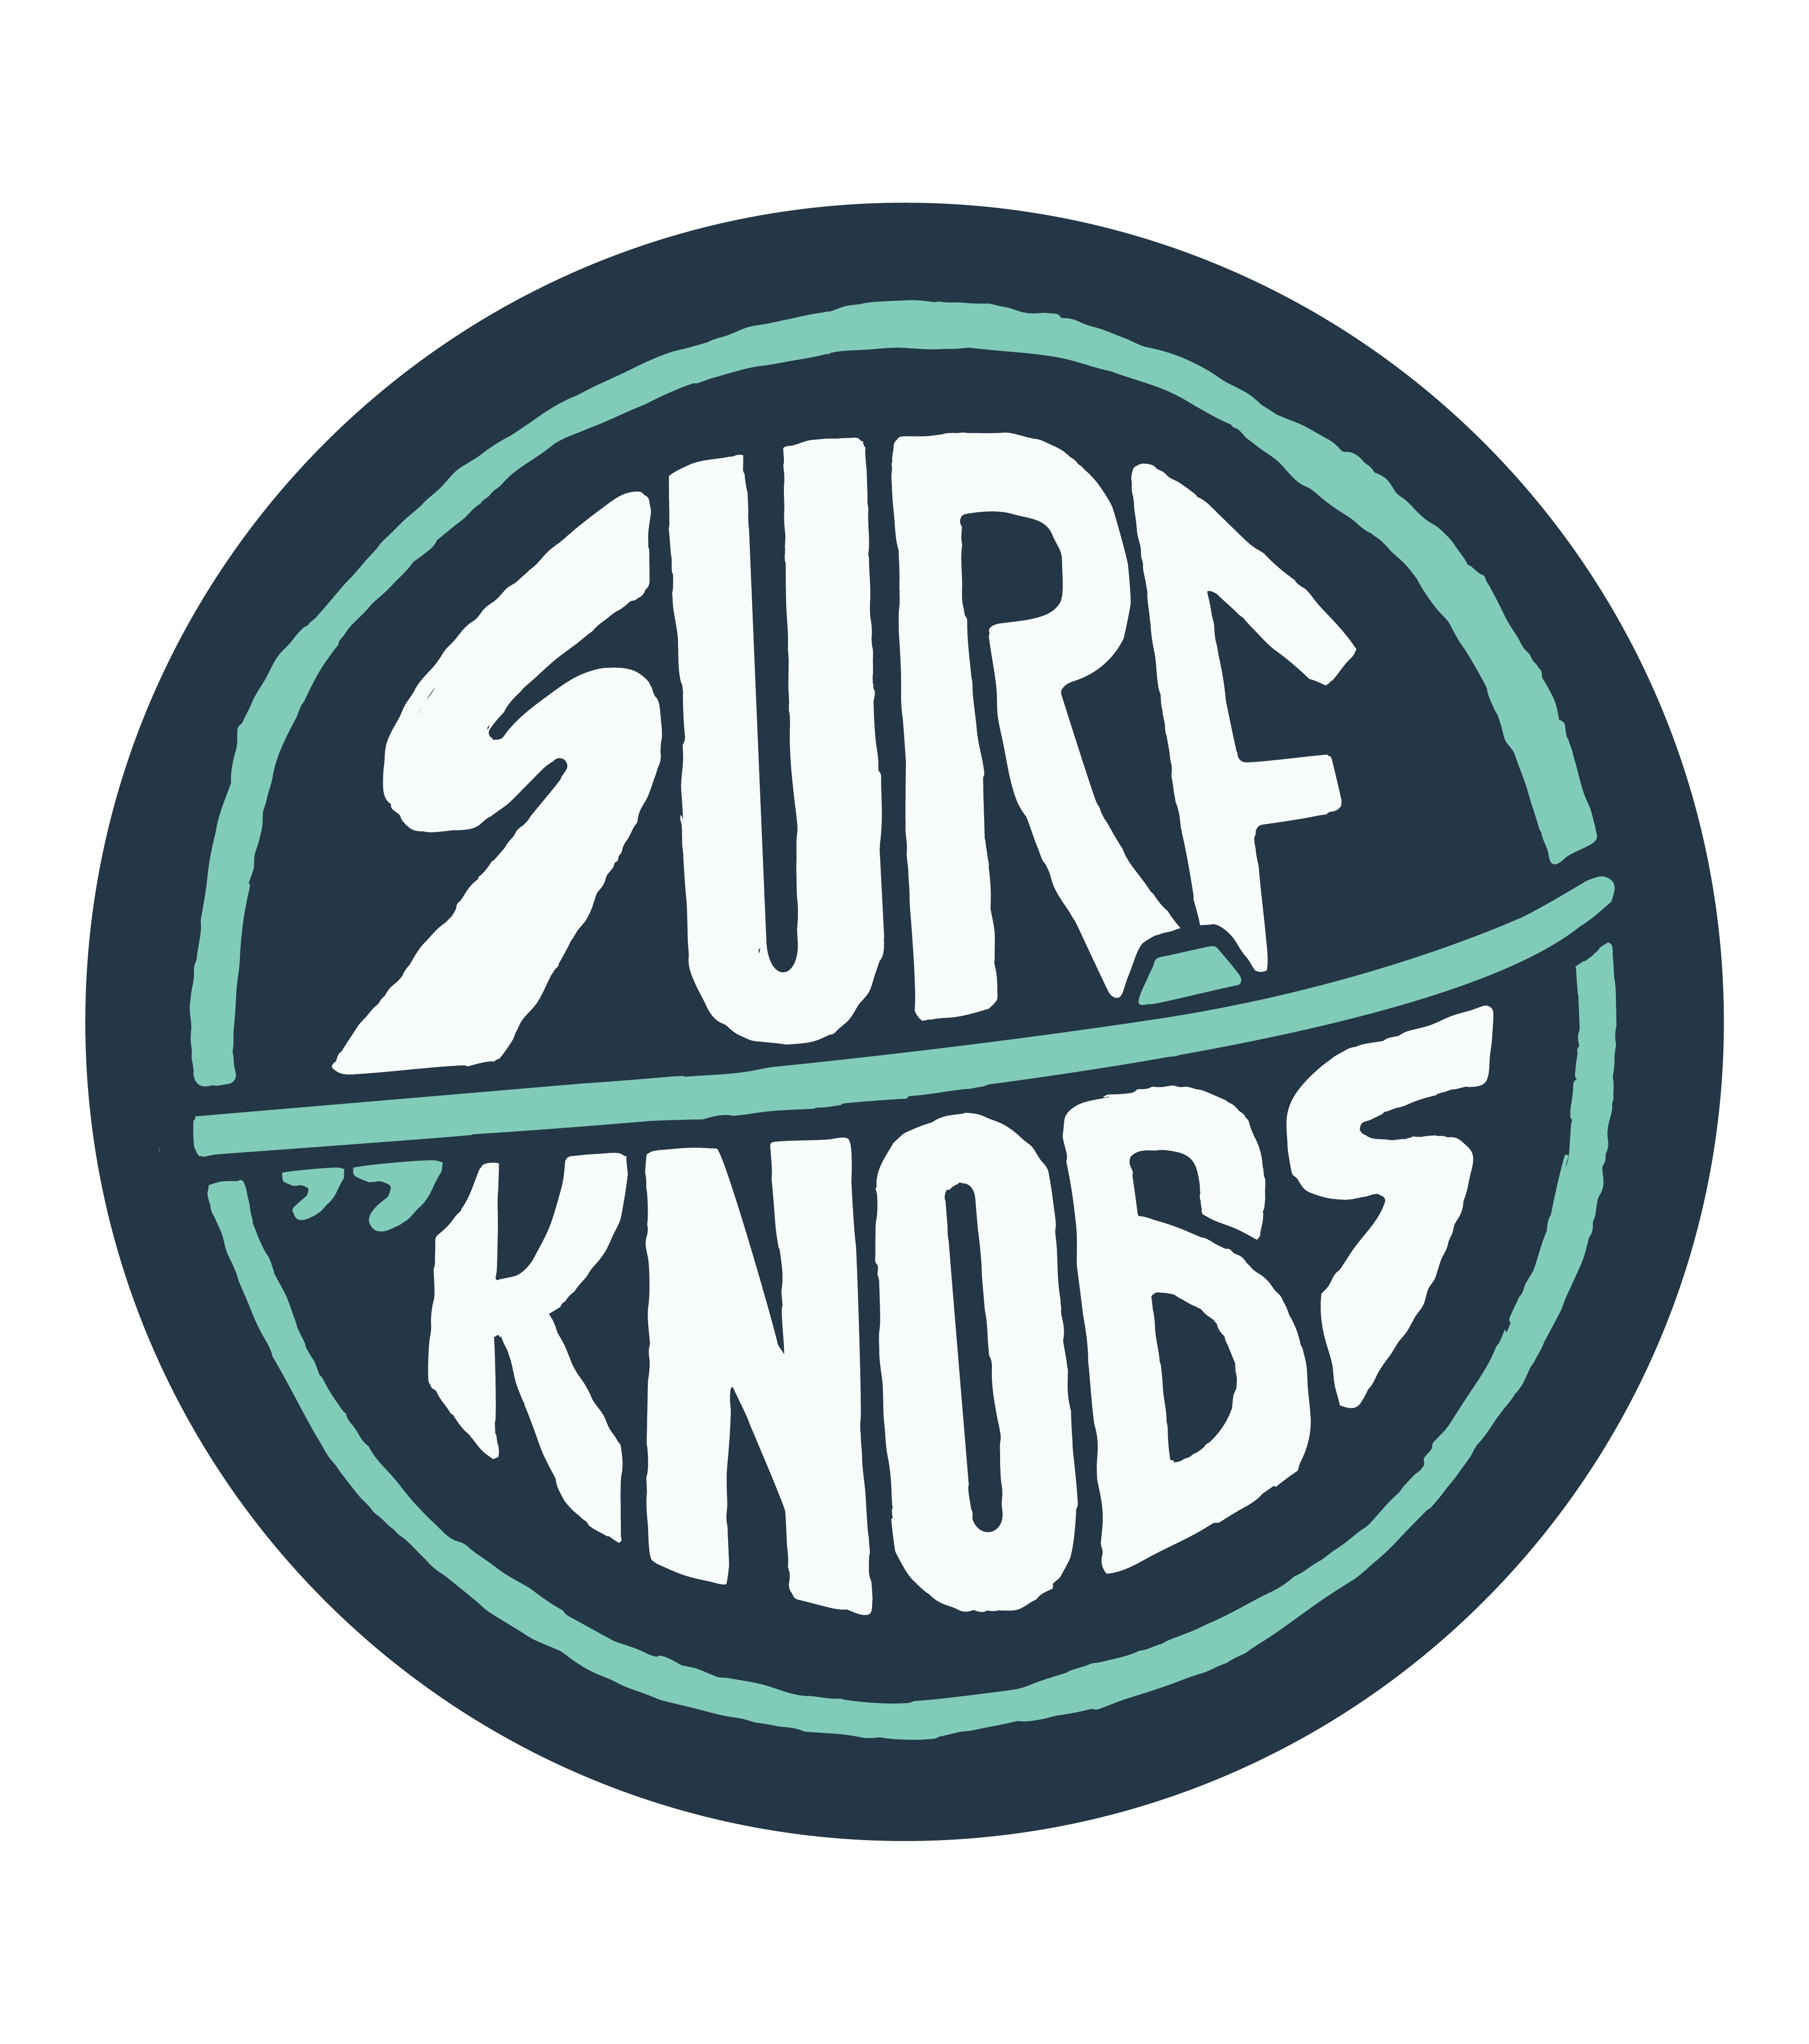 Surf Knobs Sticker and Wristband Pack - Surf Knobs